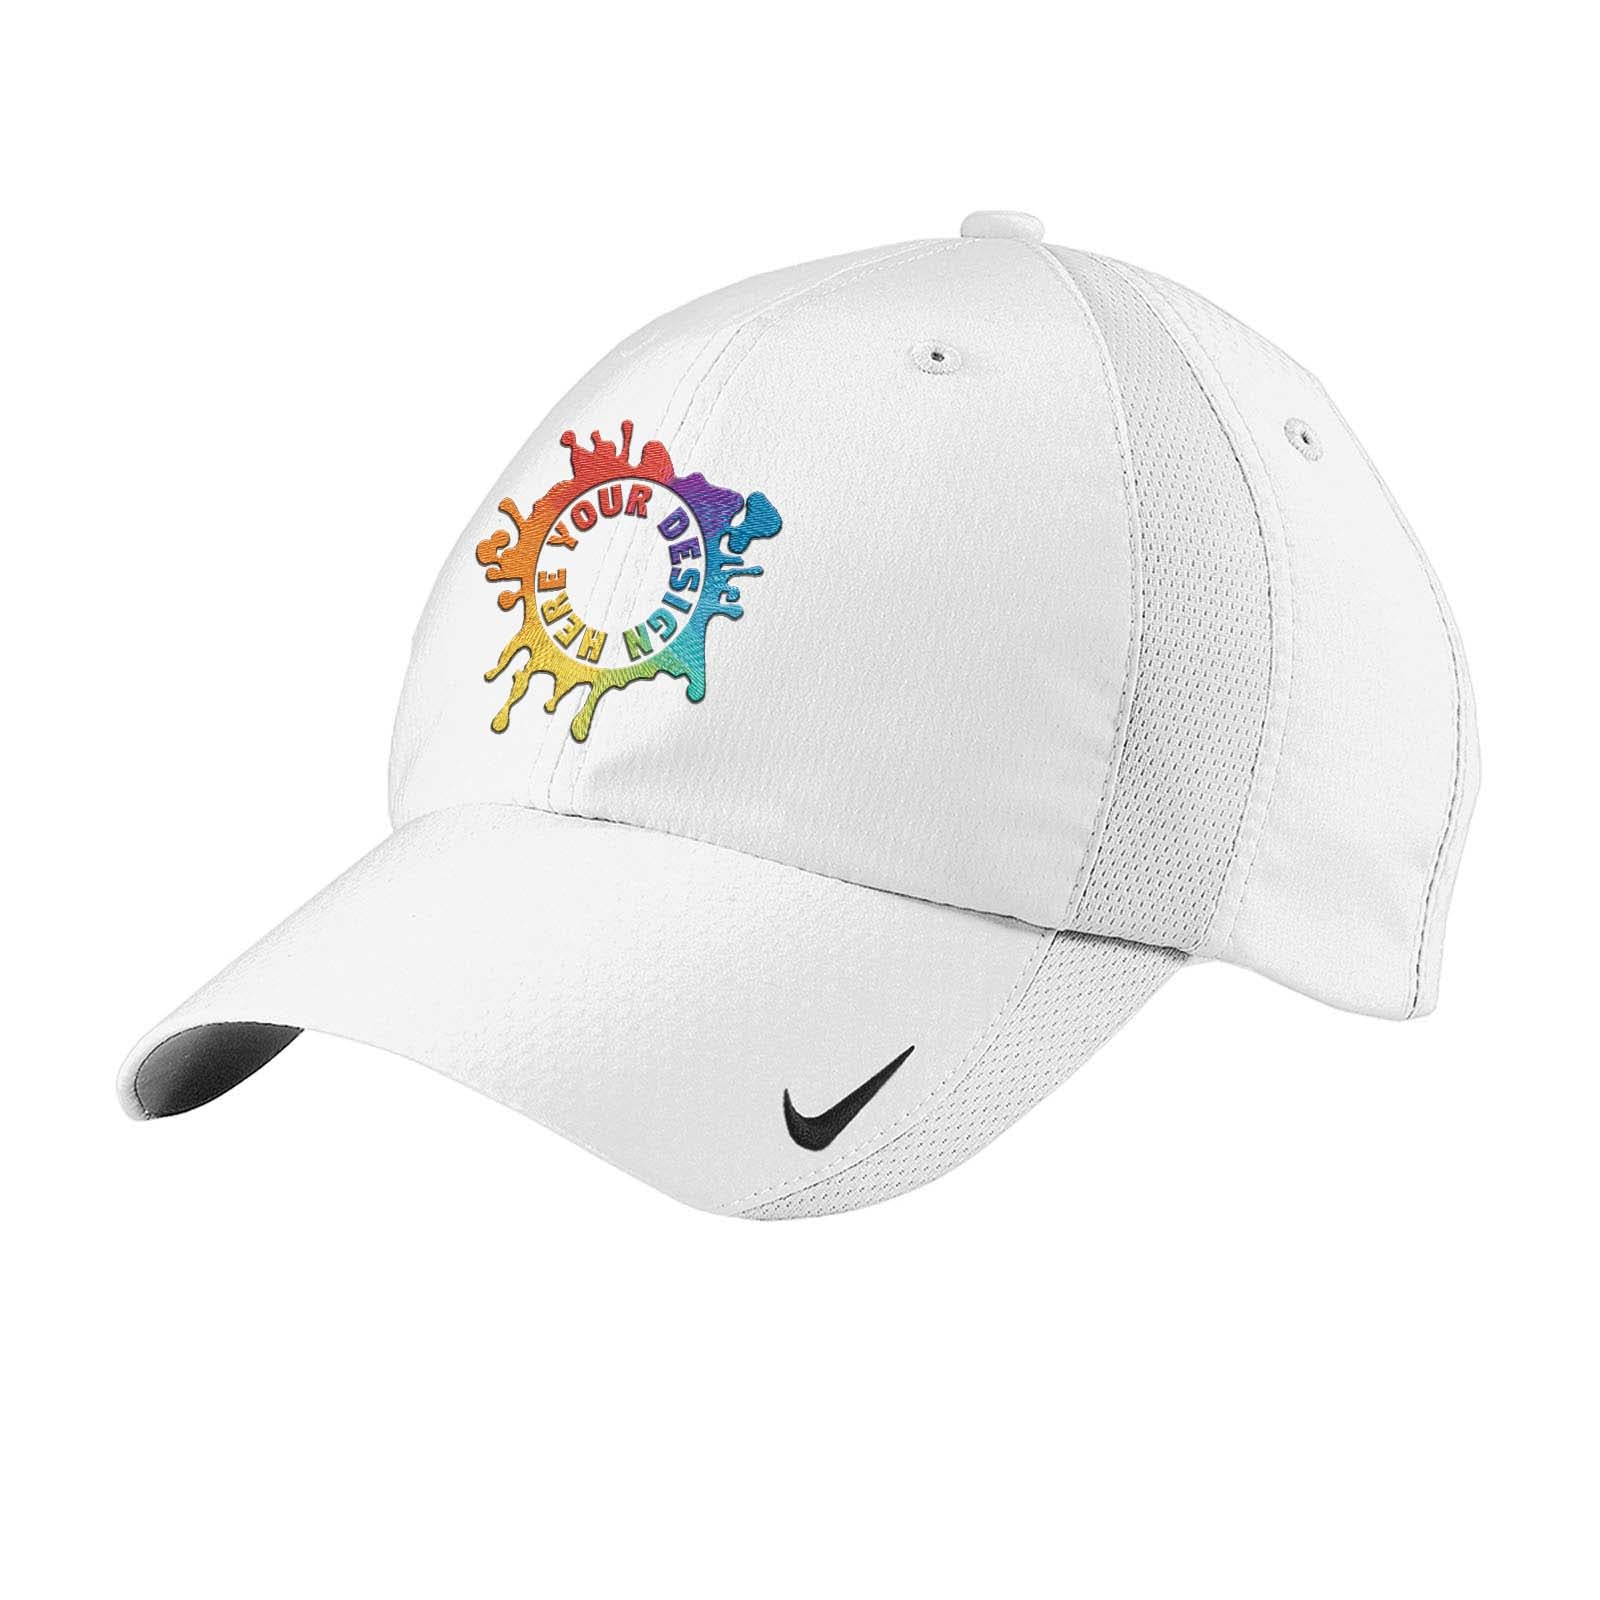 Embroidered Nike Sphere Dry Cap - Mato & Hash